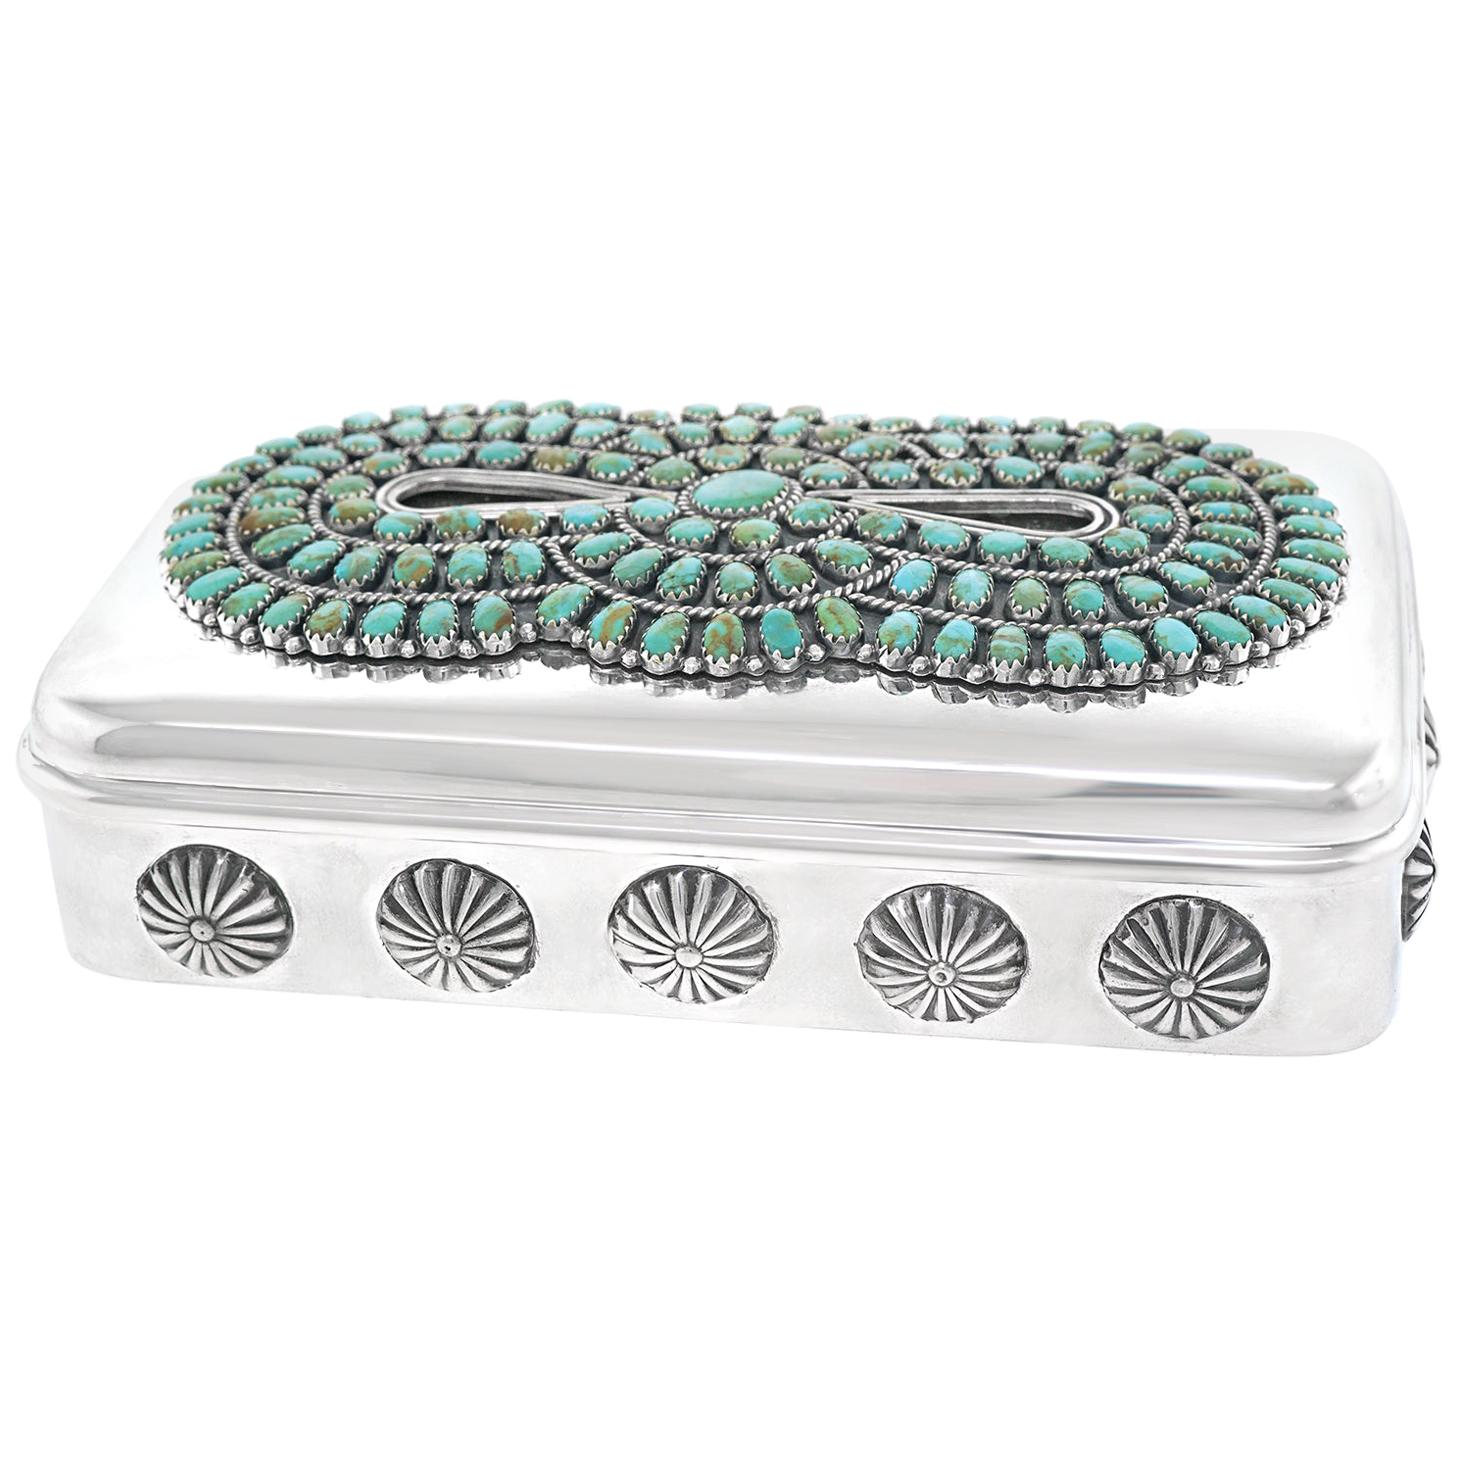 Tiffany & Co. Navajo-Element Decorated Sterling Box